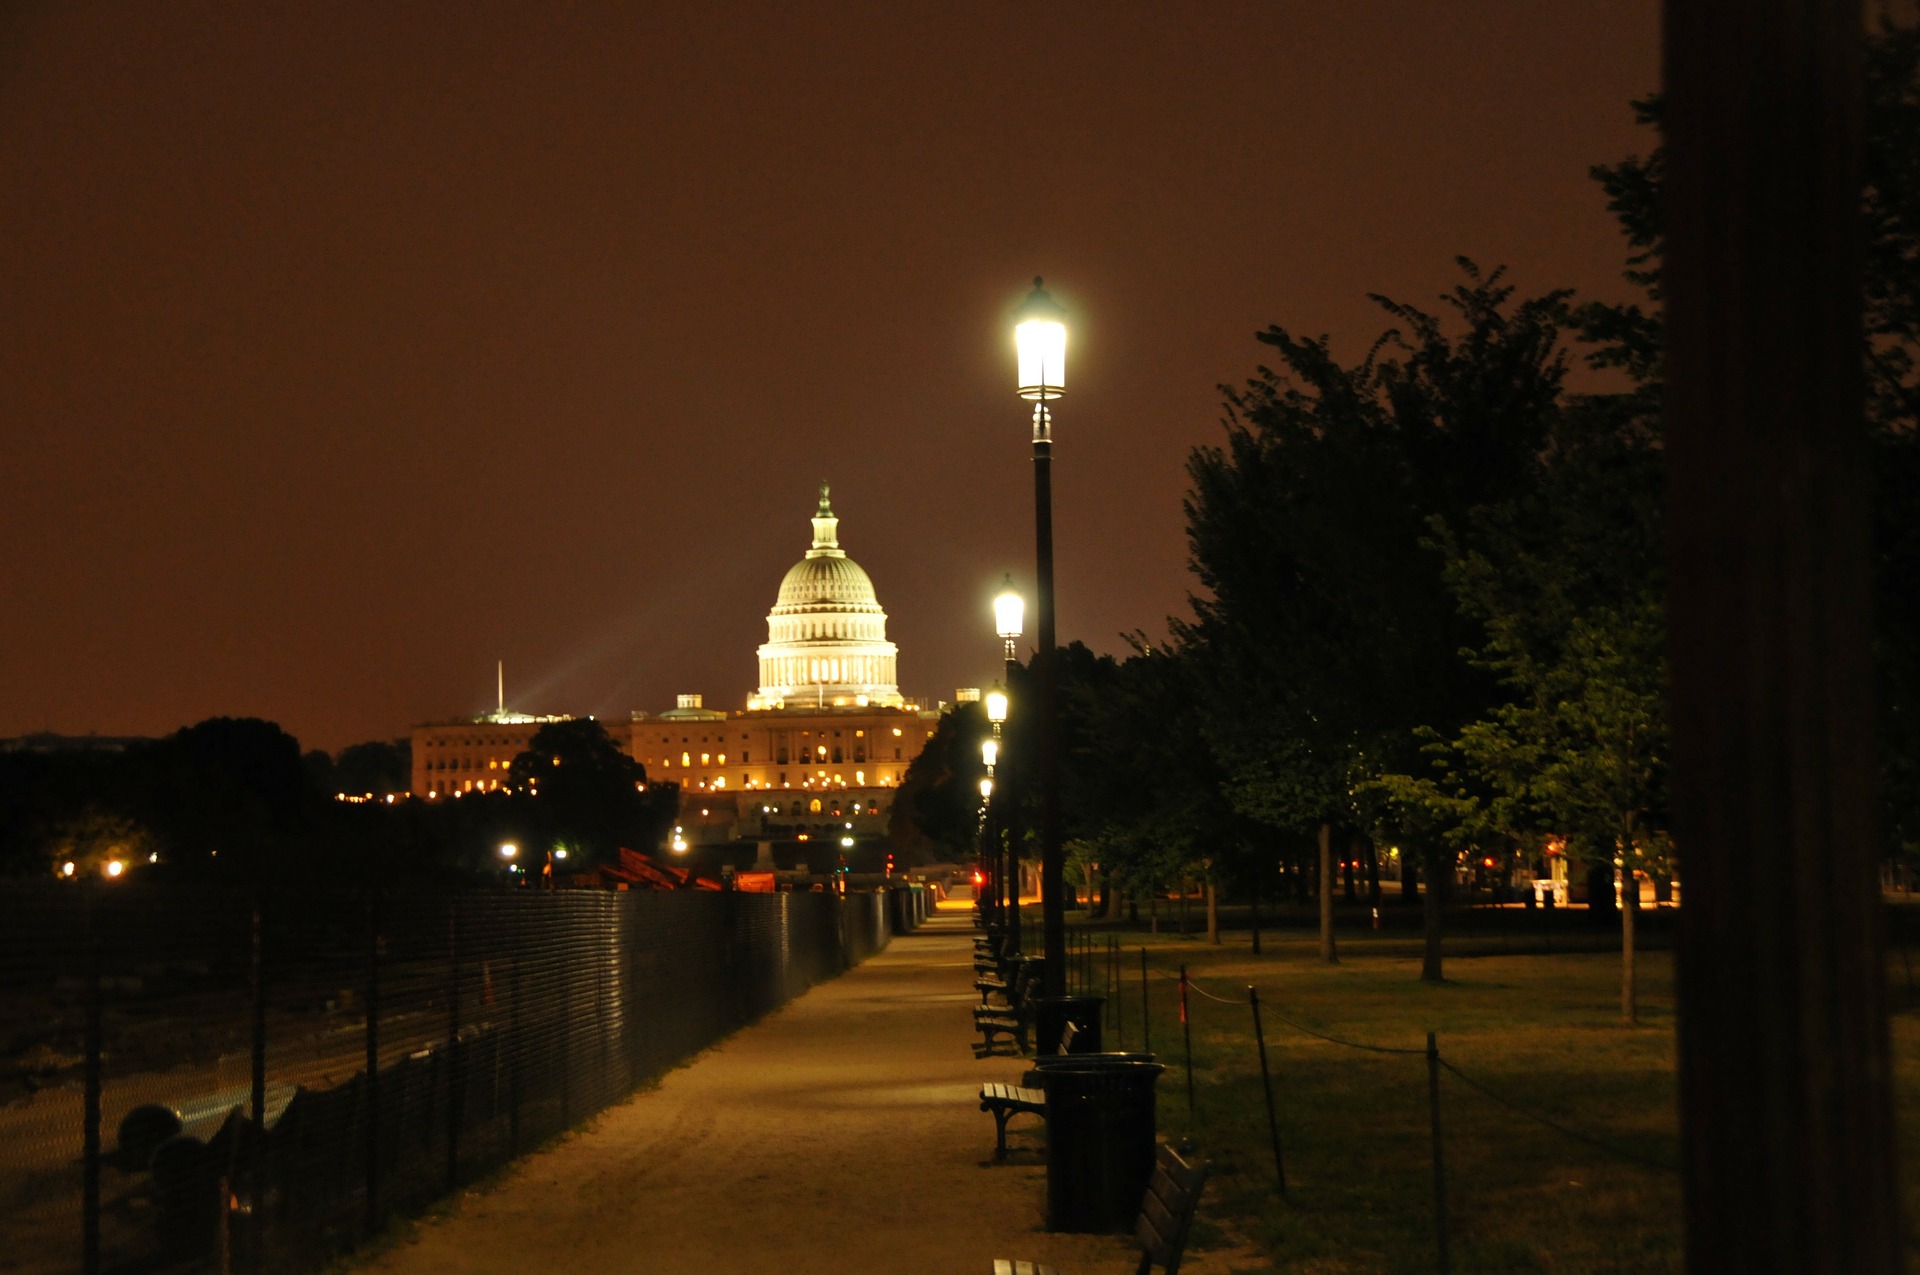 US Capitol in Washington,D.C. Image by Rich Syndram from Pixabay